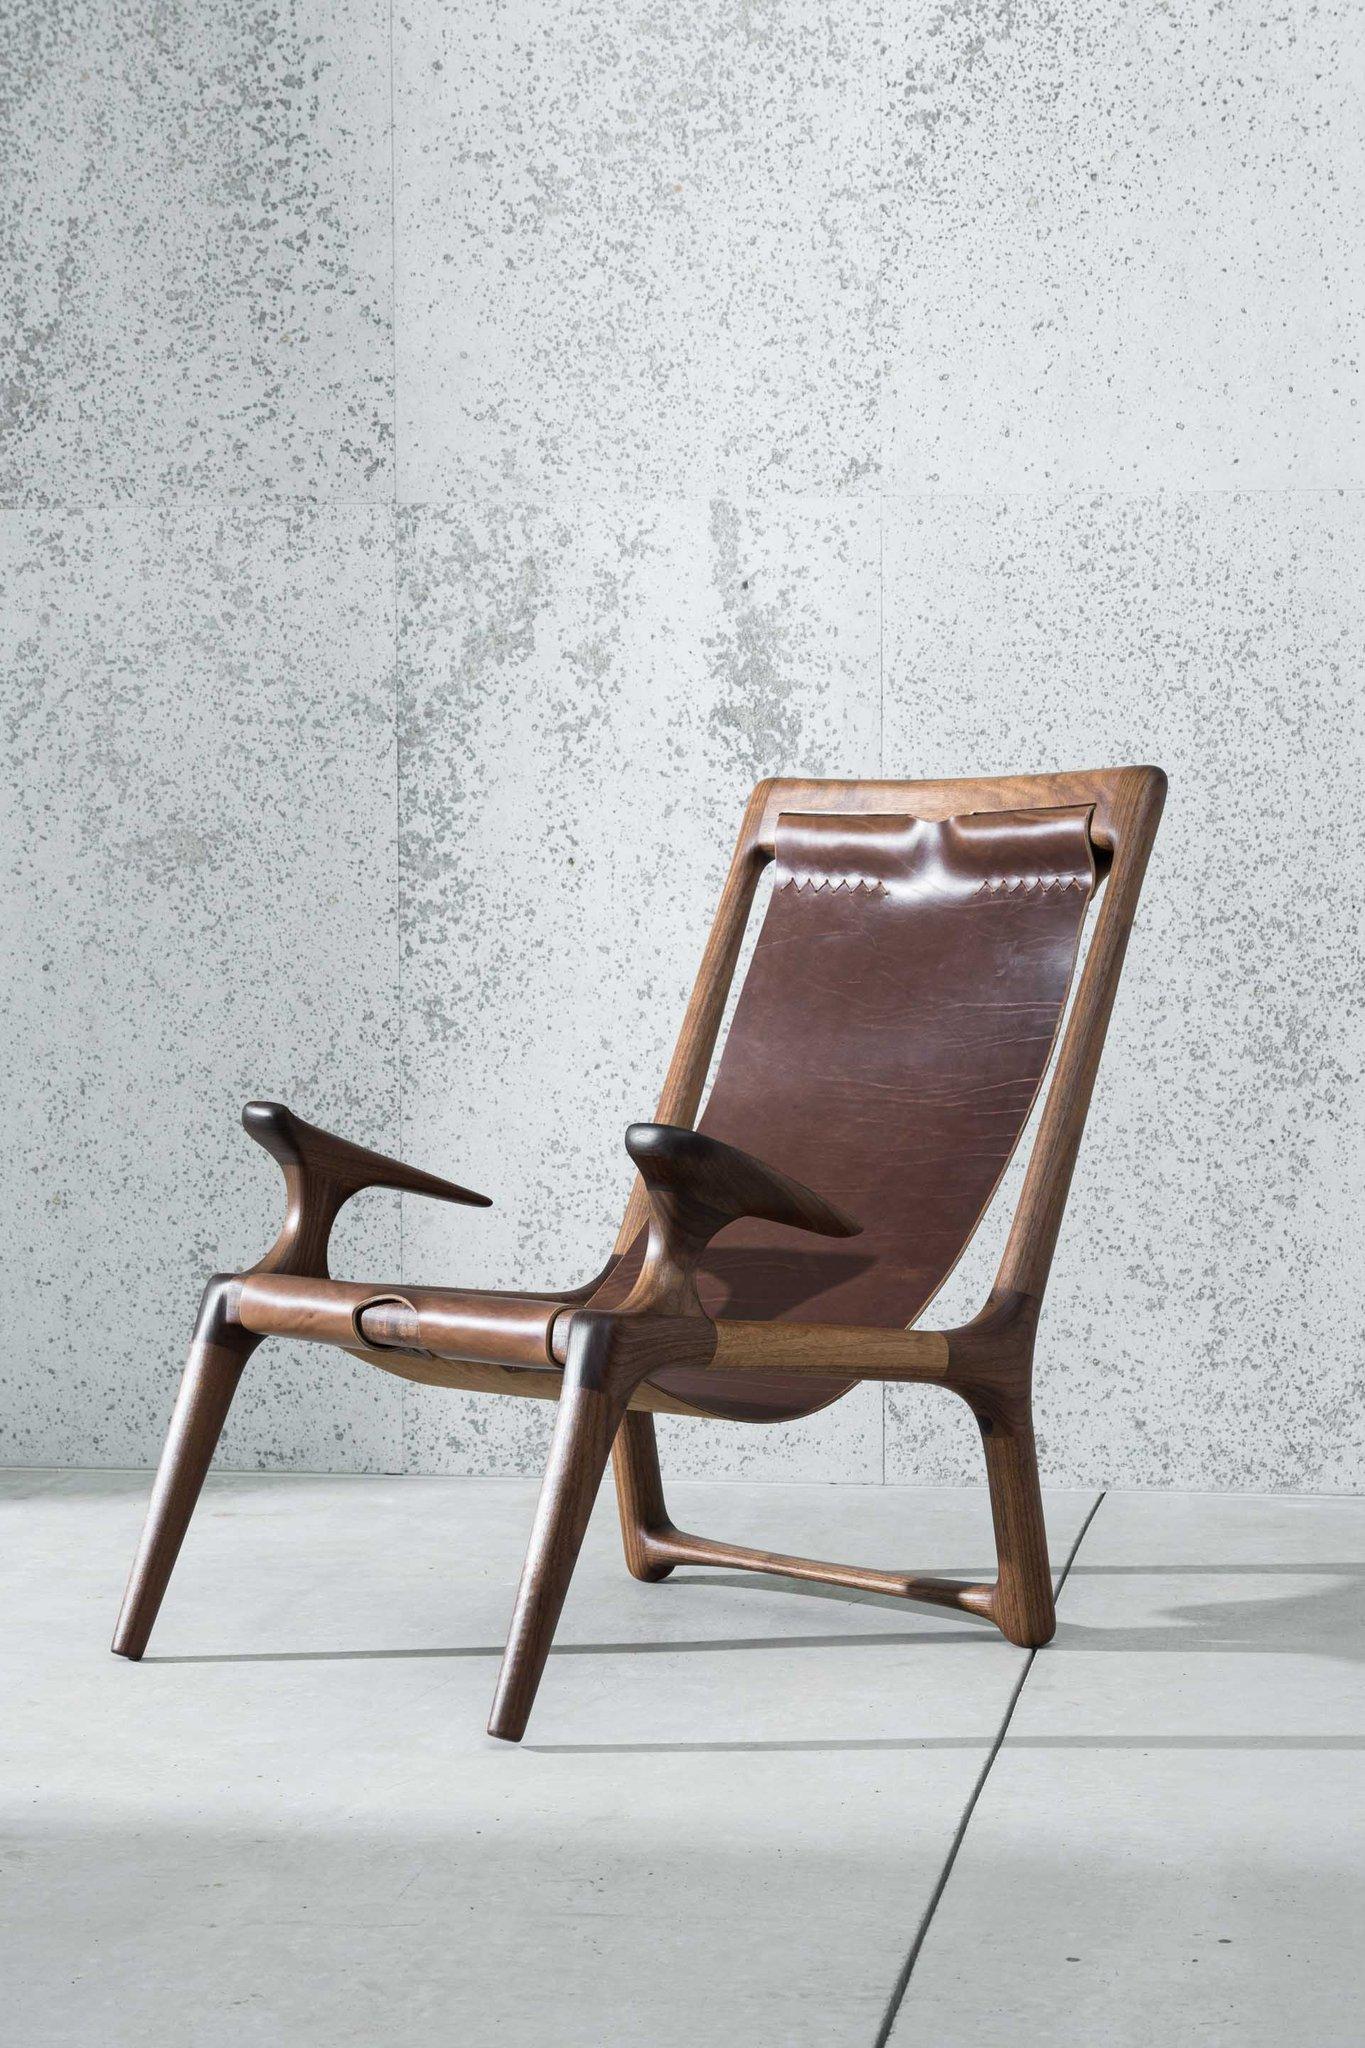 Walnut & leather sling chair by Fernweh Woodworking
Dimensions: 
W 27